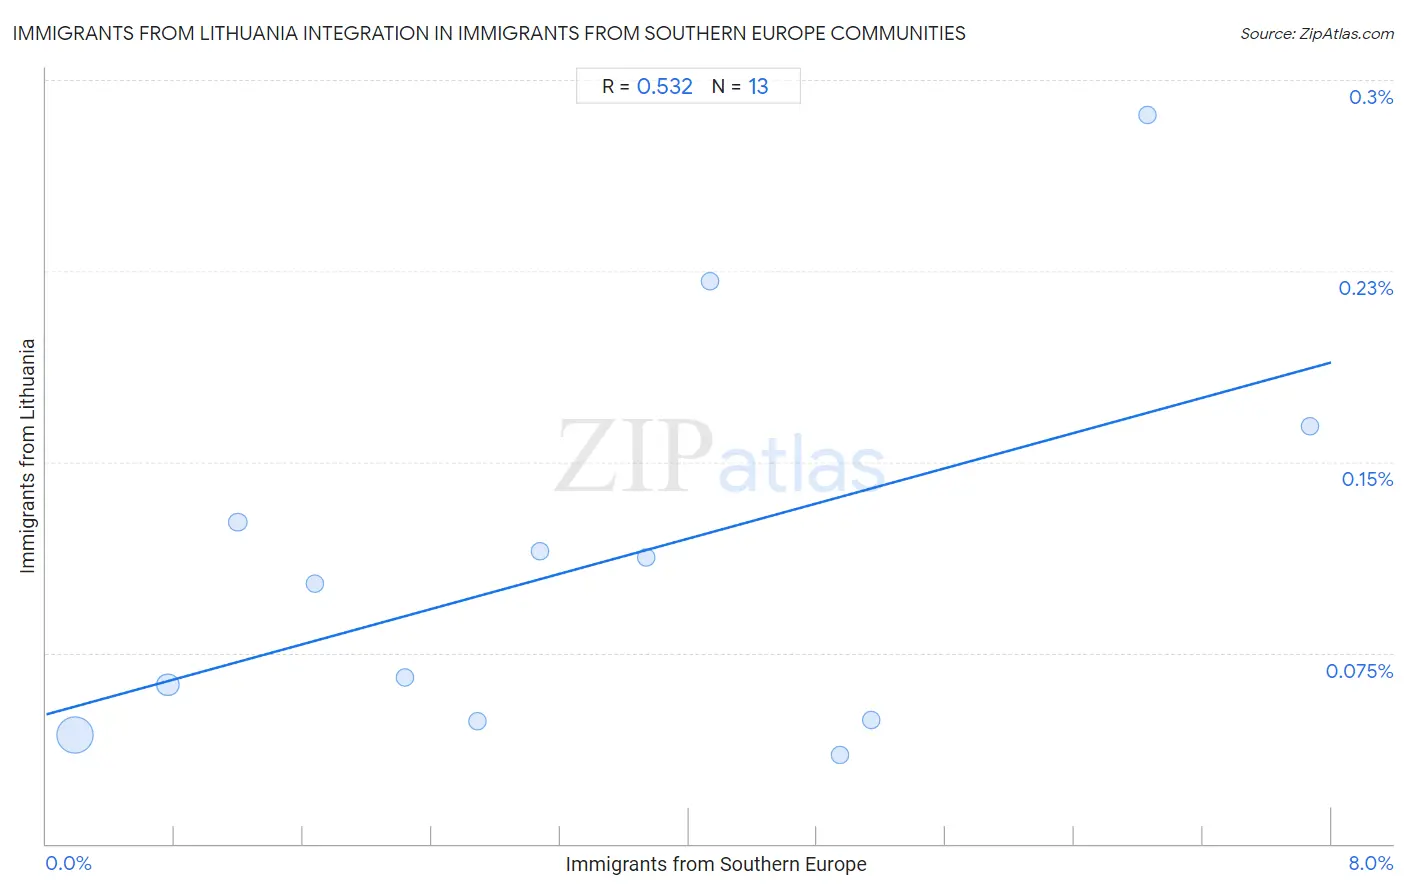 Immigrants from Southern Europe Integration in Immigrants from Lithuania Communities